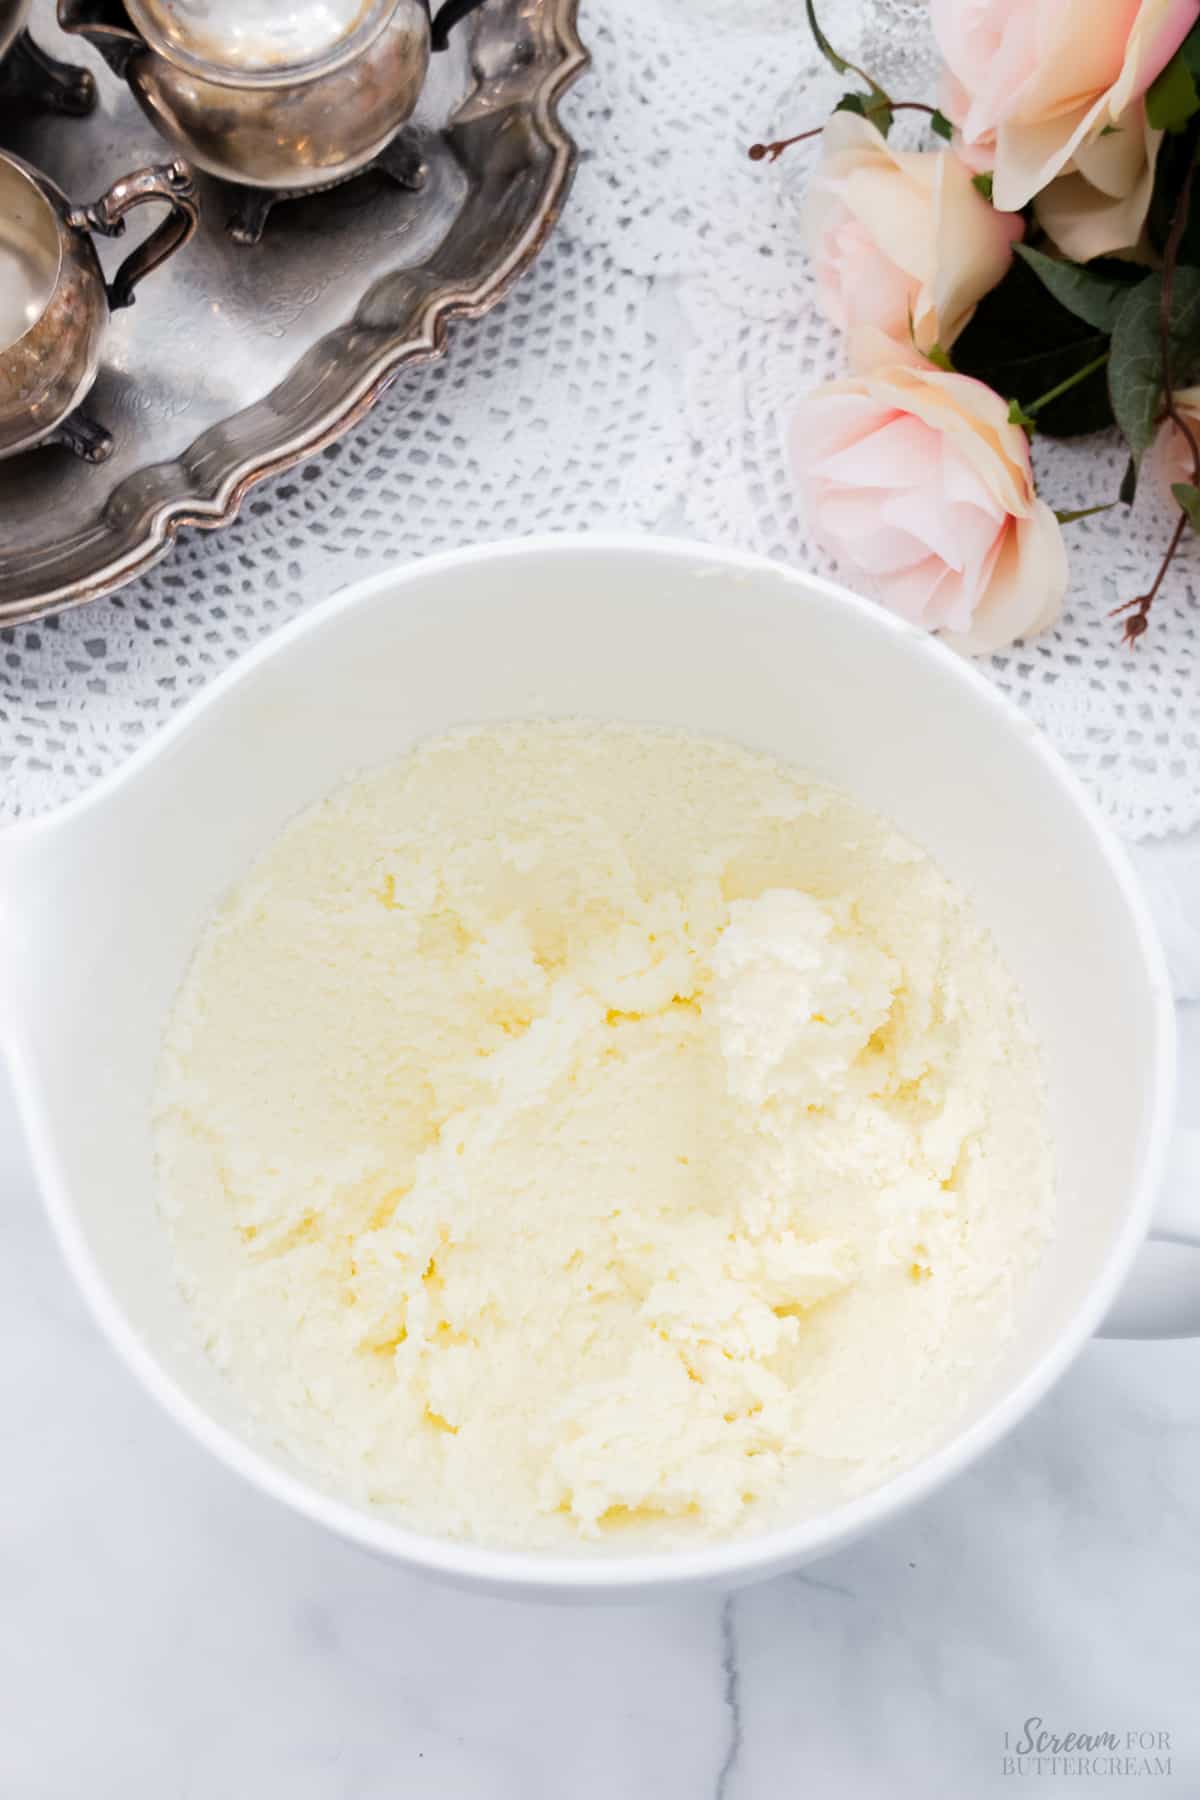 Whipped butter and sugar in a mixing bowl.